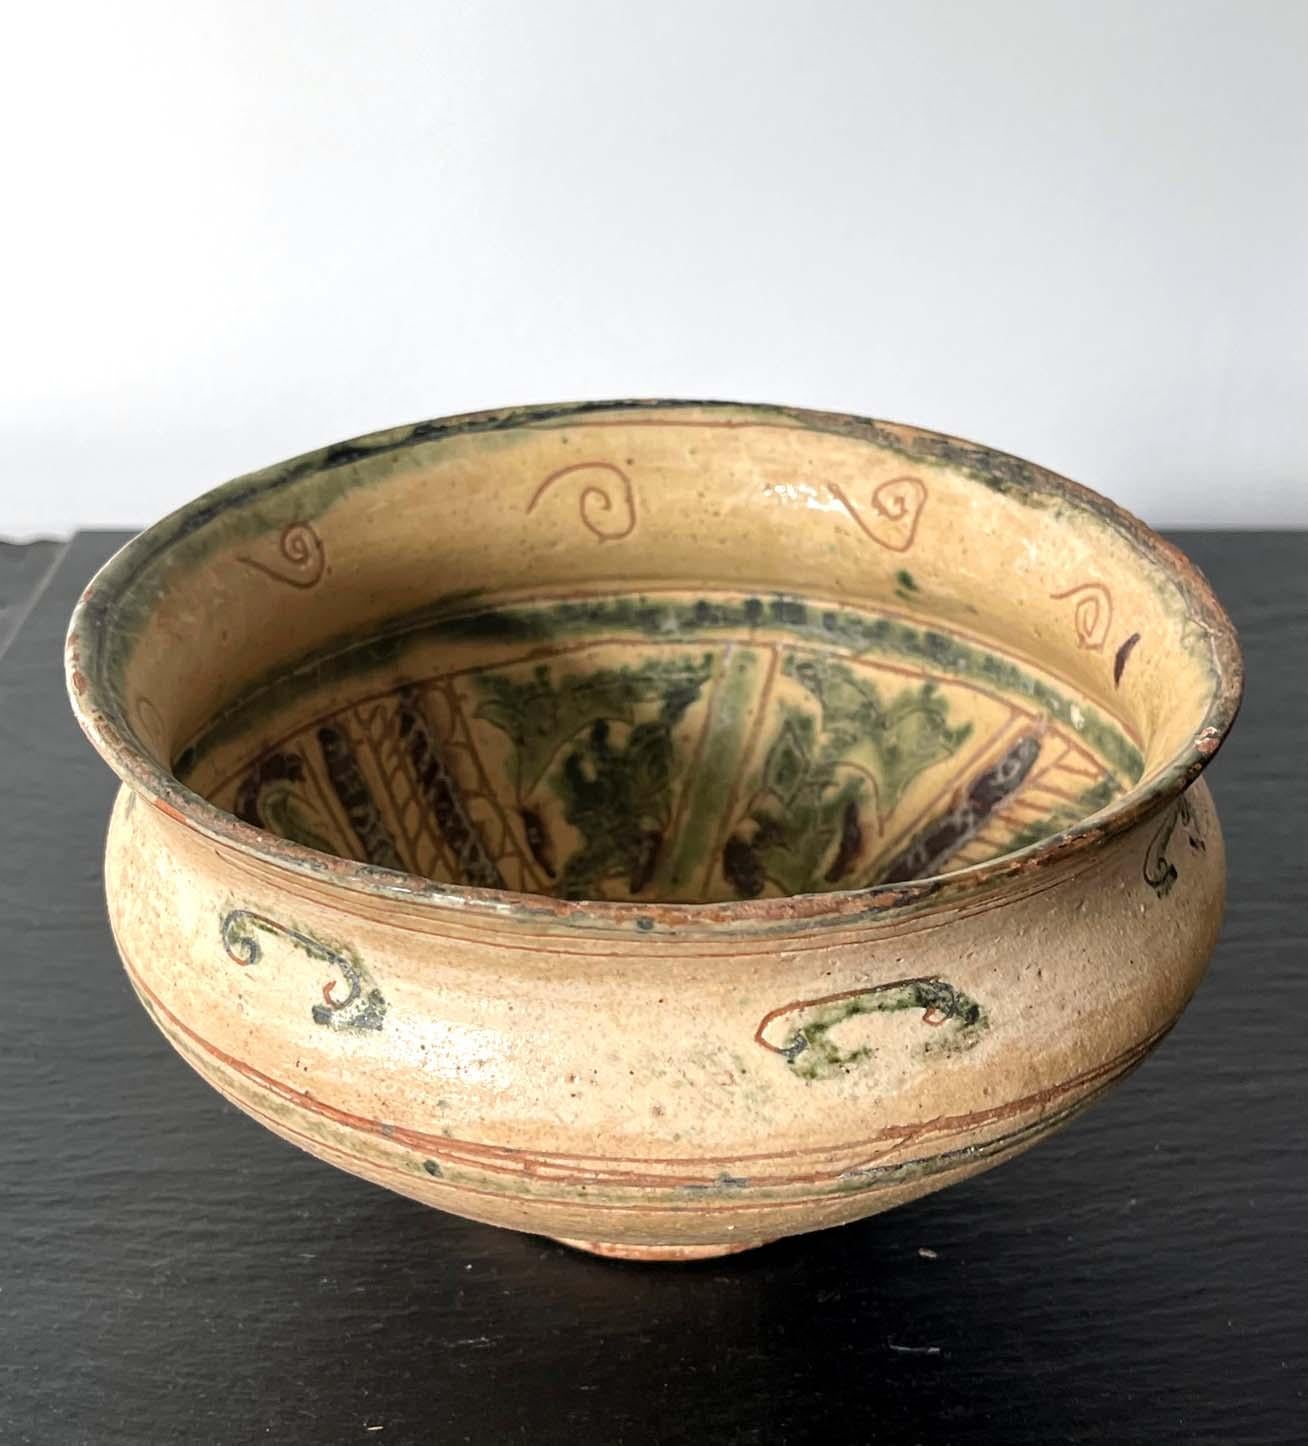 Antique Islamic Ceramic Glazed Bowl with Splashed and Sgraffito Decoration In Good Condition For Sale In Atlanta, GA